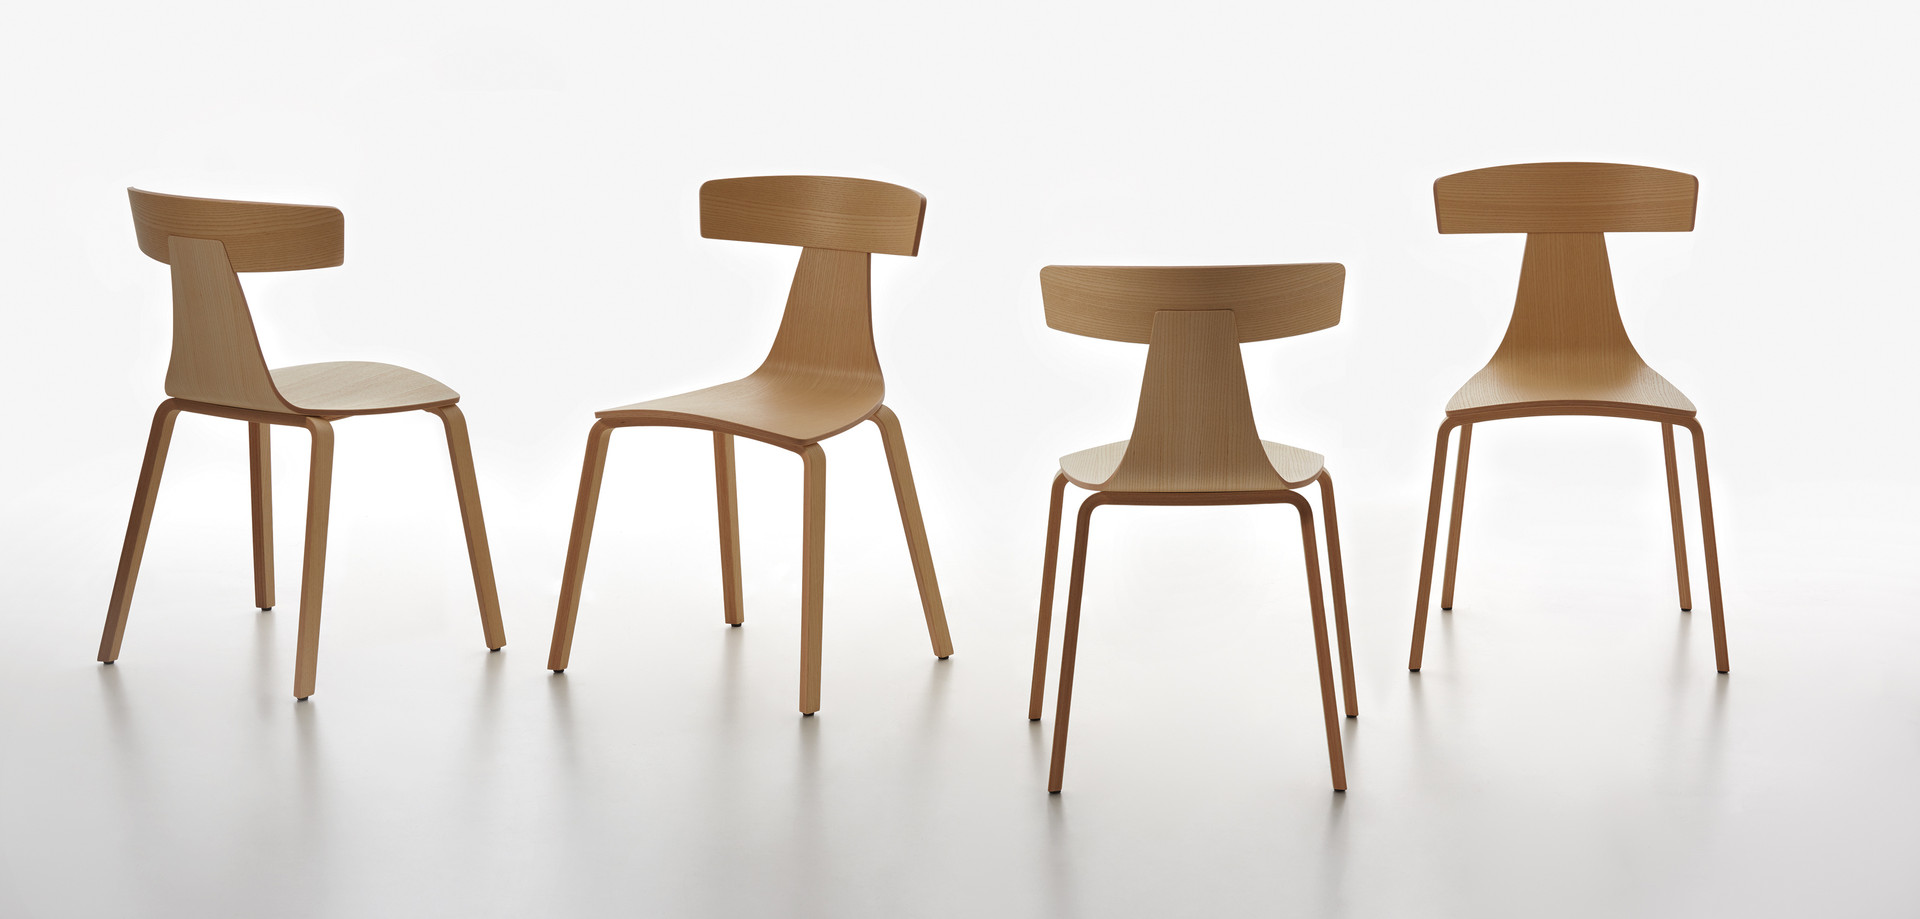 Plank - REMO wood chair, ash natural, all sides